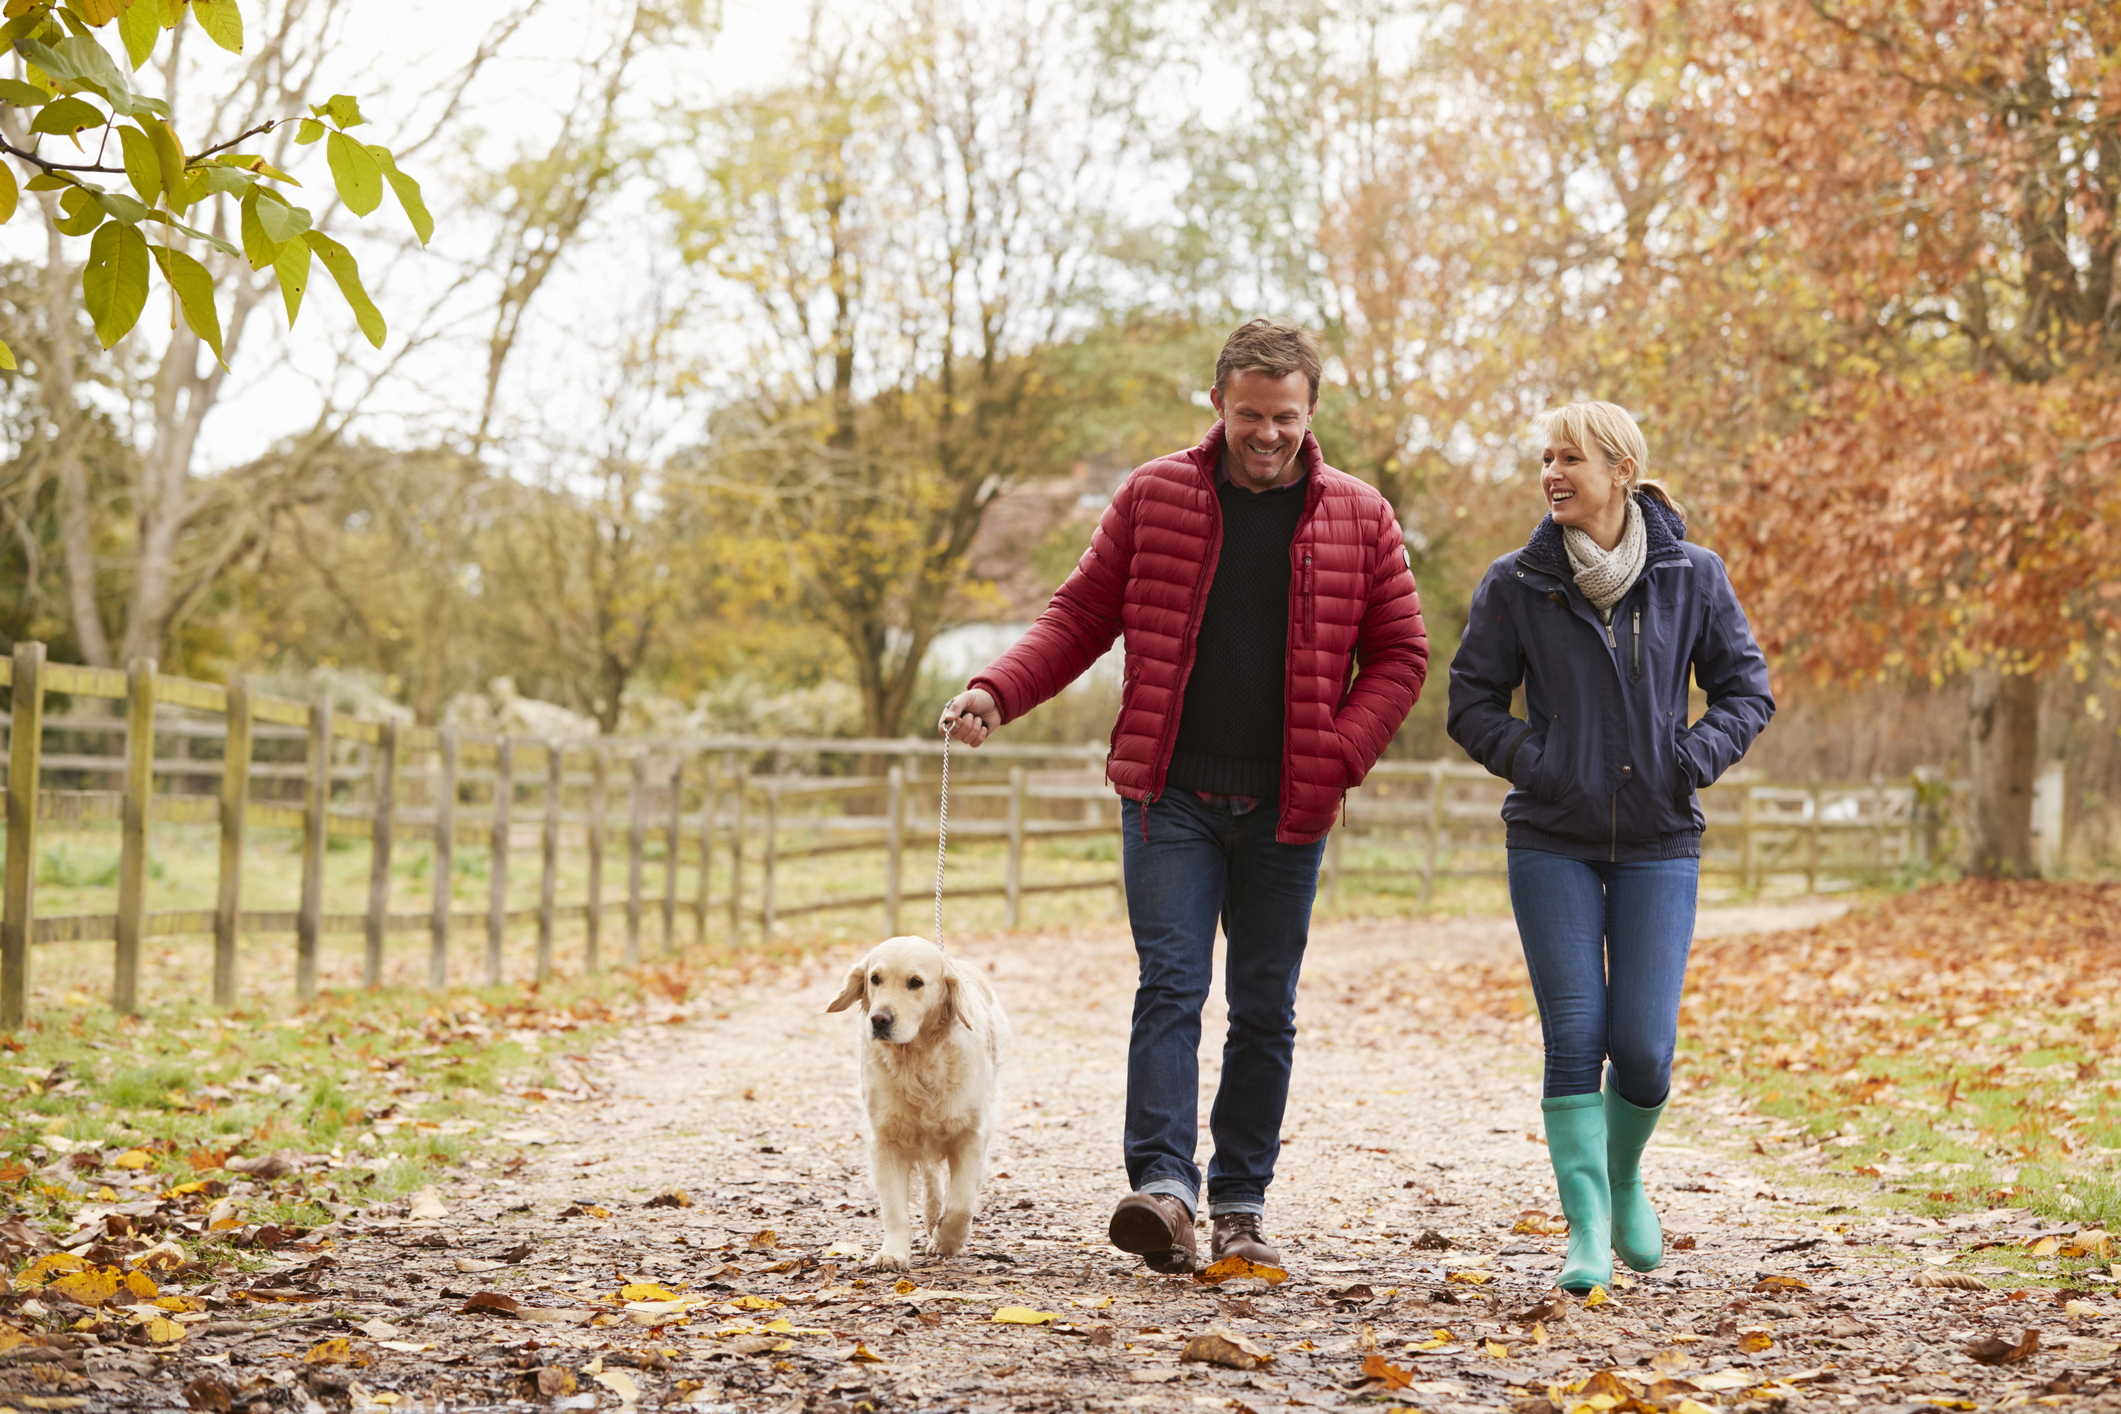 Couple walking with their dog (Thinkstock/PA)